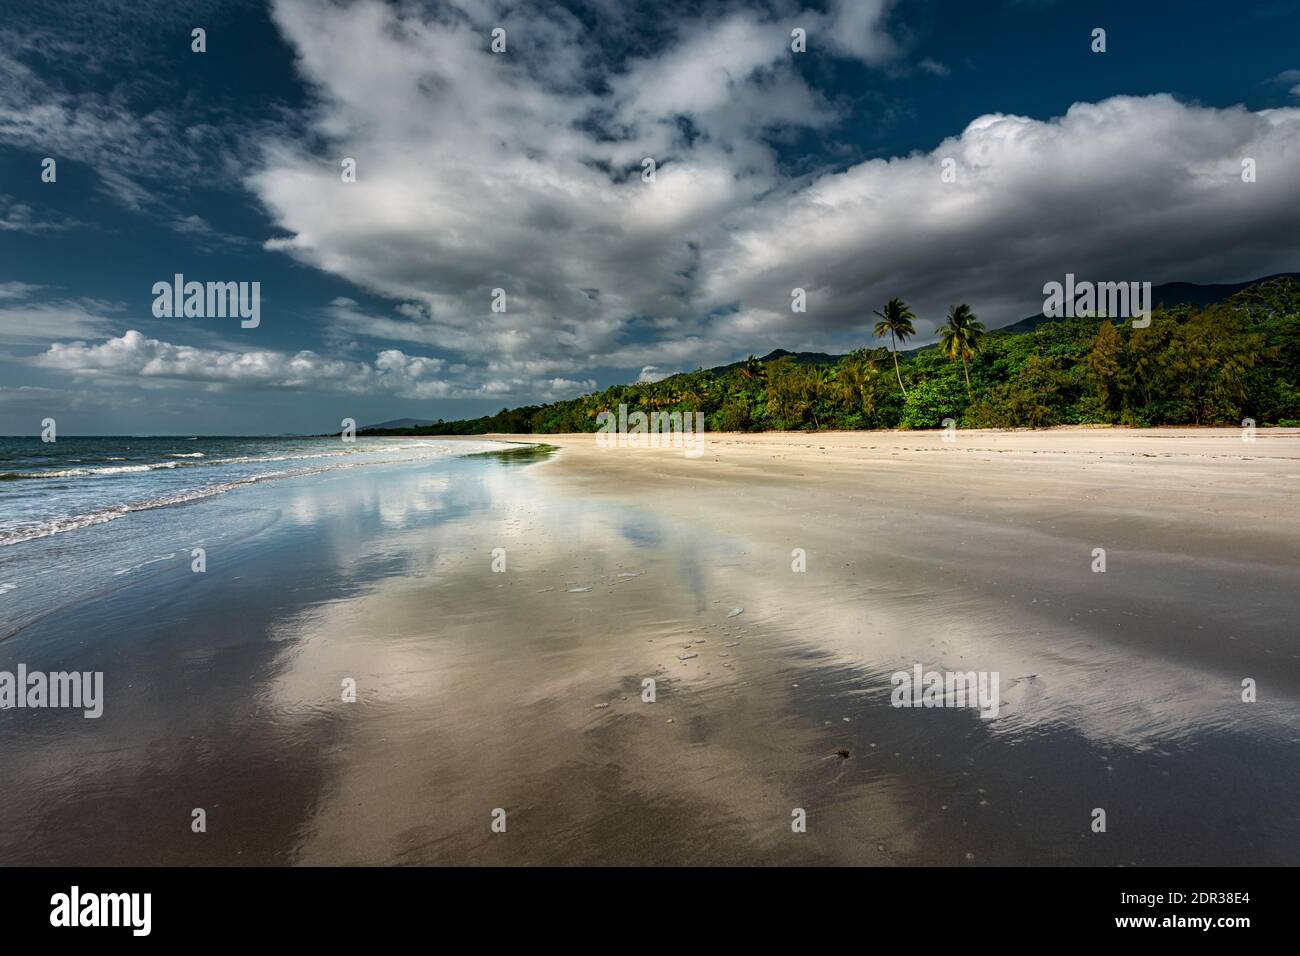 Beautiful Myall Beach in Daintree National Park, part of the world heritage-listed Wet Tropics. Stock Photo